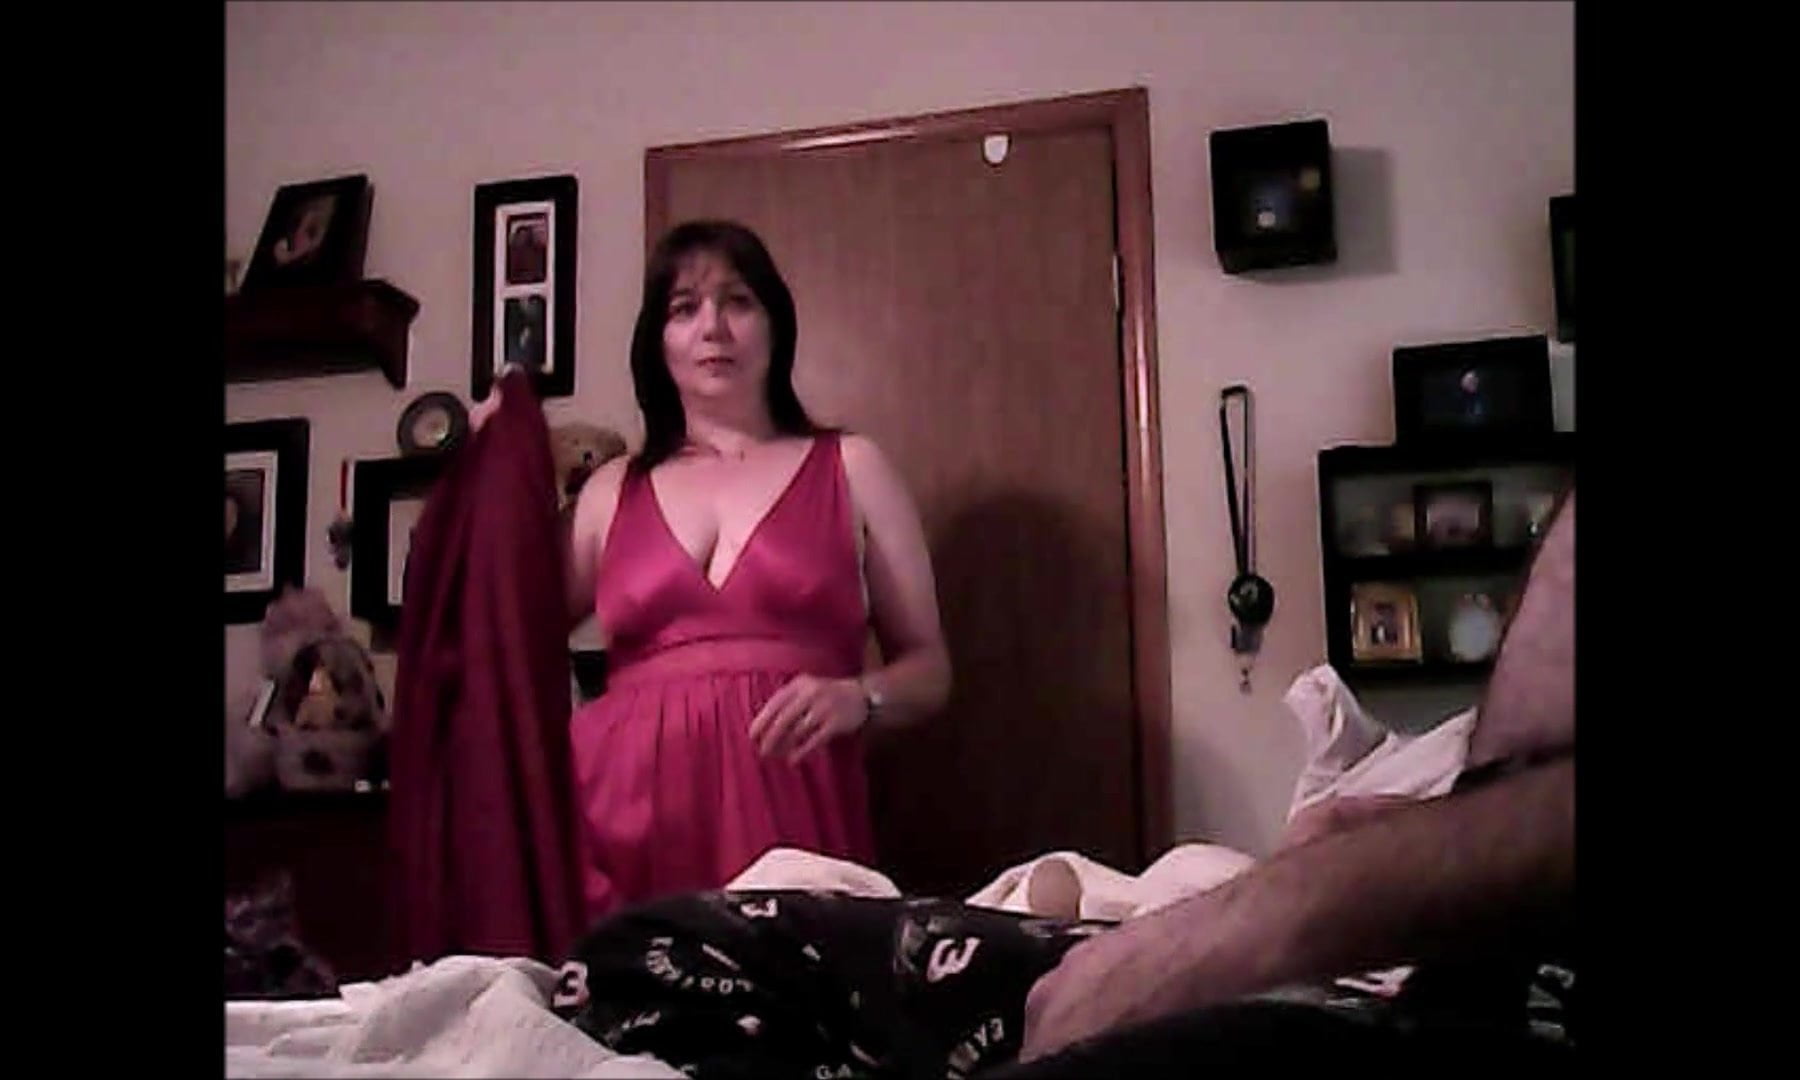 Watch My Wife Stripping for Me video on xHamster